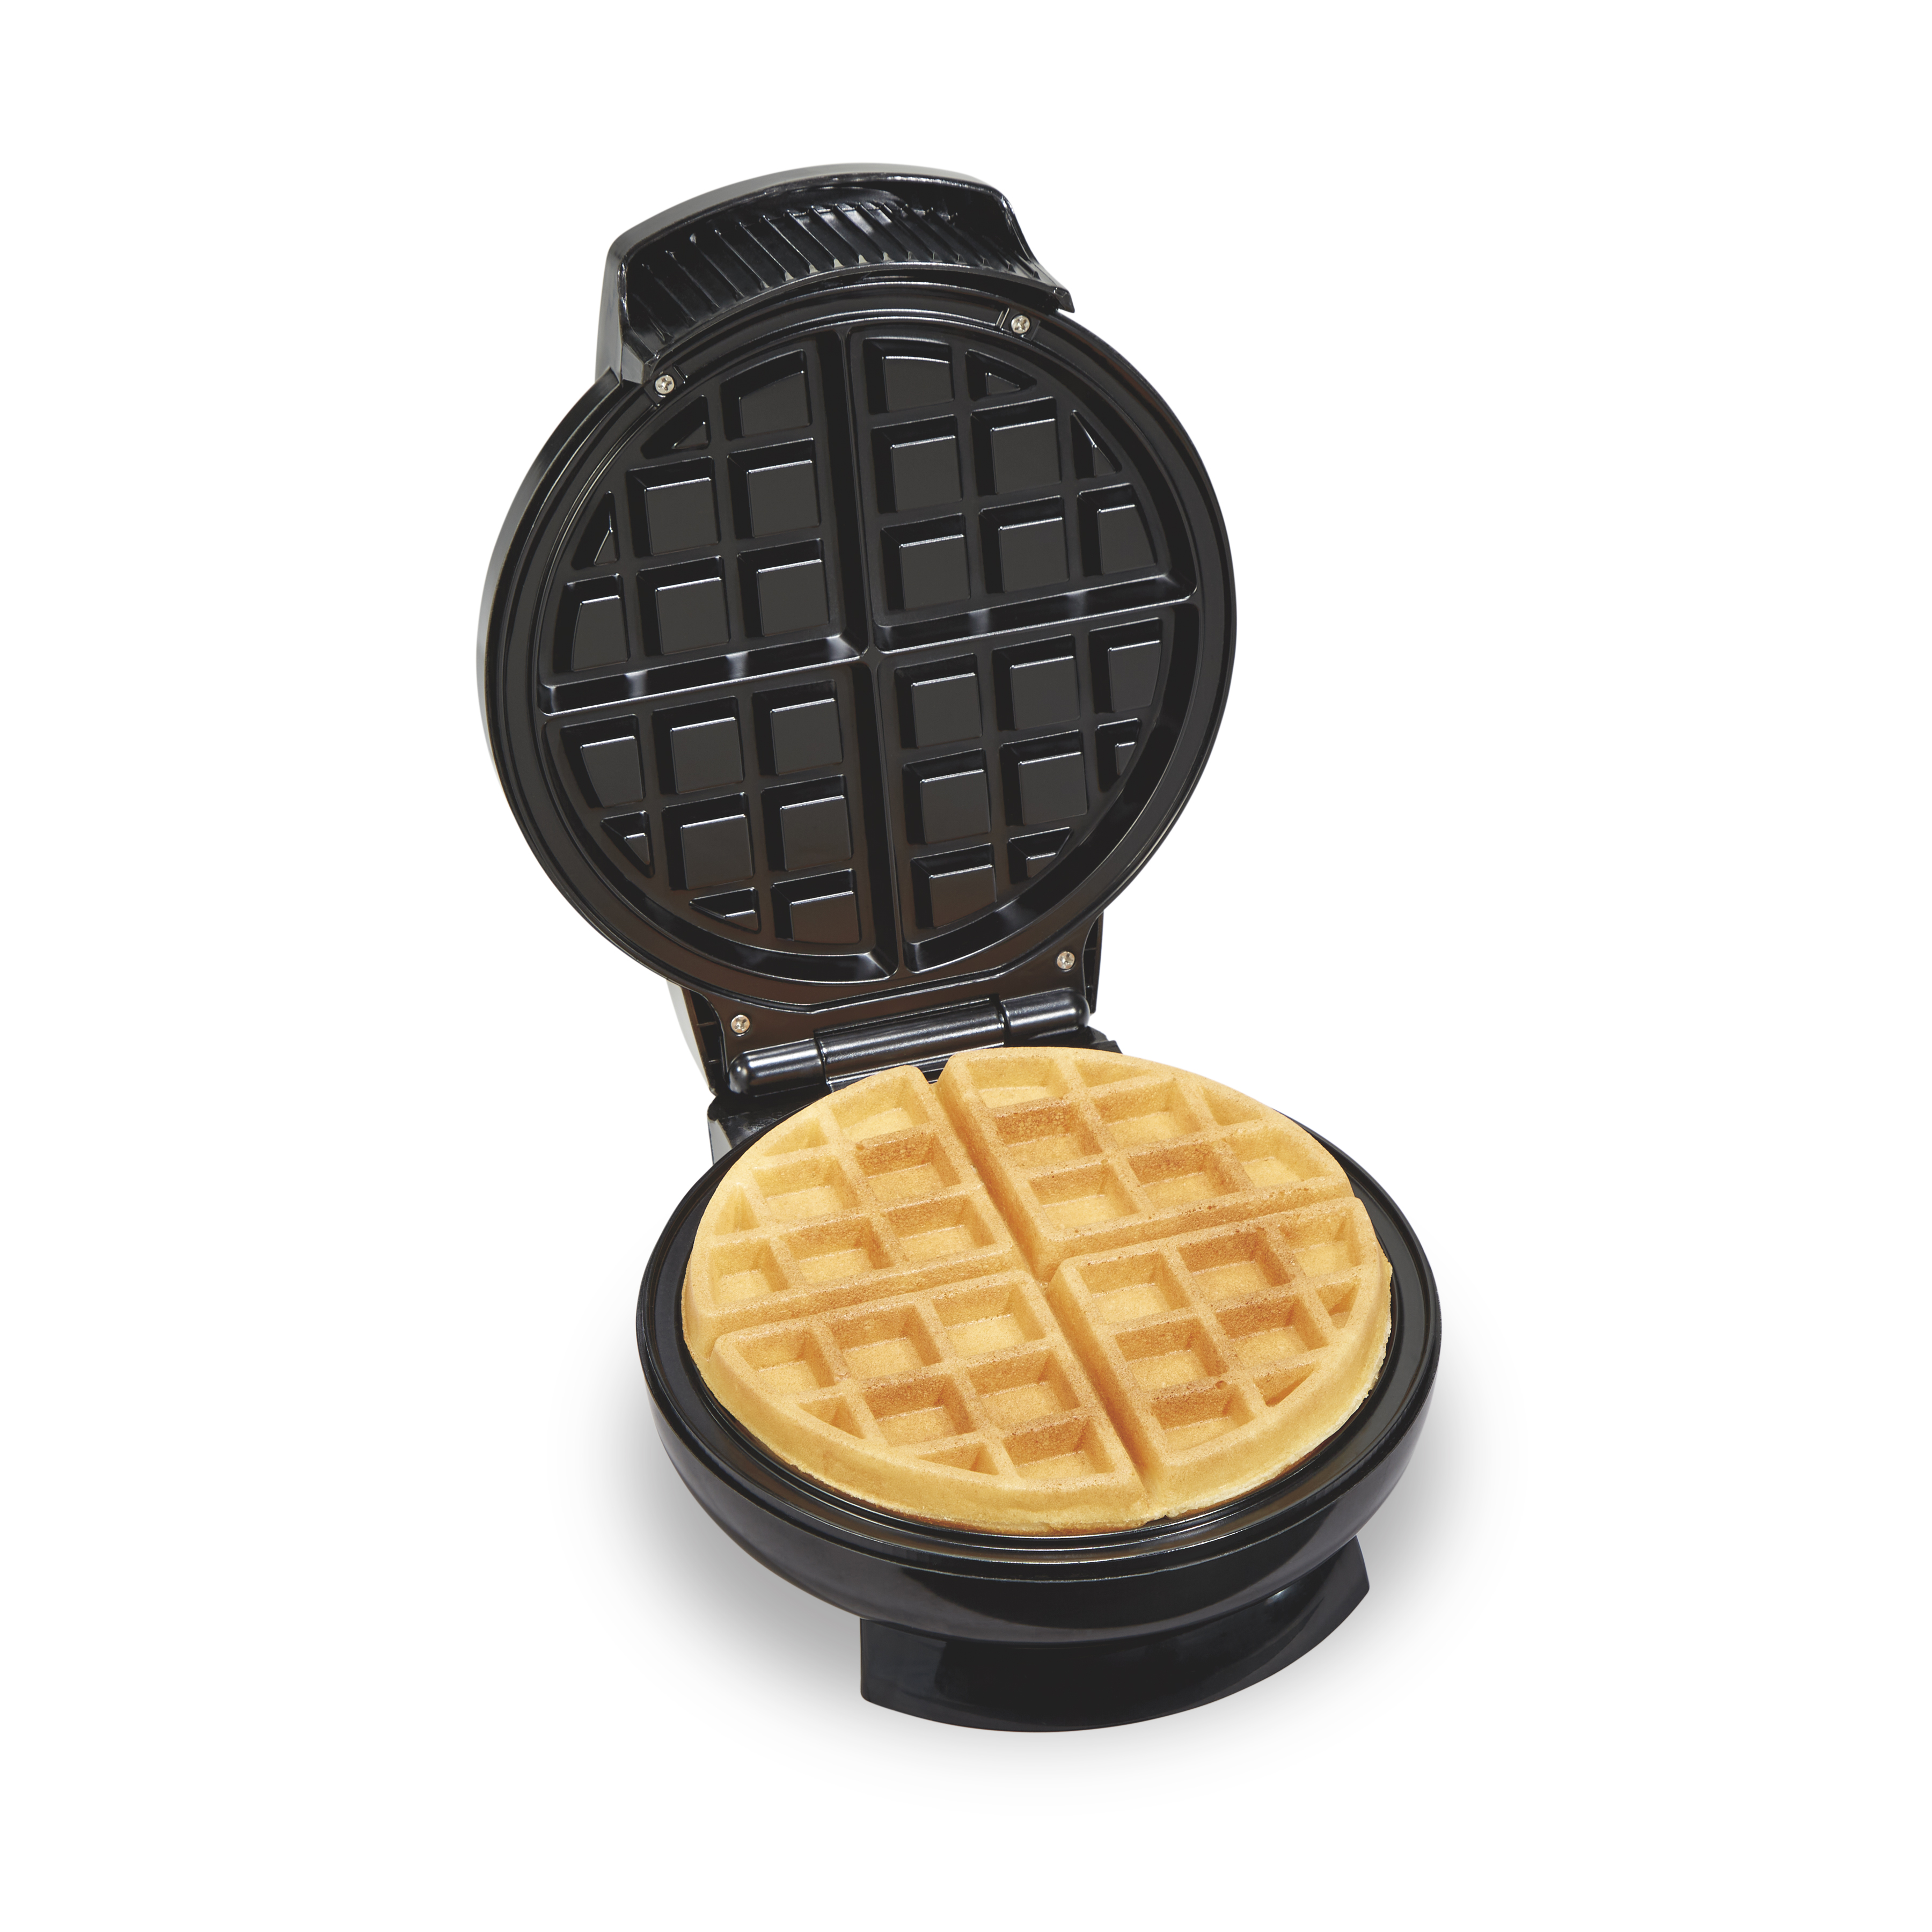 Hamilton Beach Belgian Waffle Maker with Easy to Clean Non-Stick Plates, Black 26072 - image 1 of 8